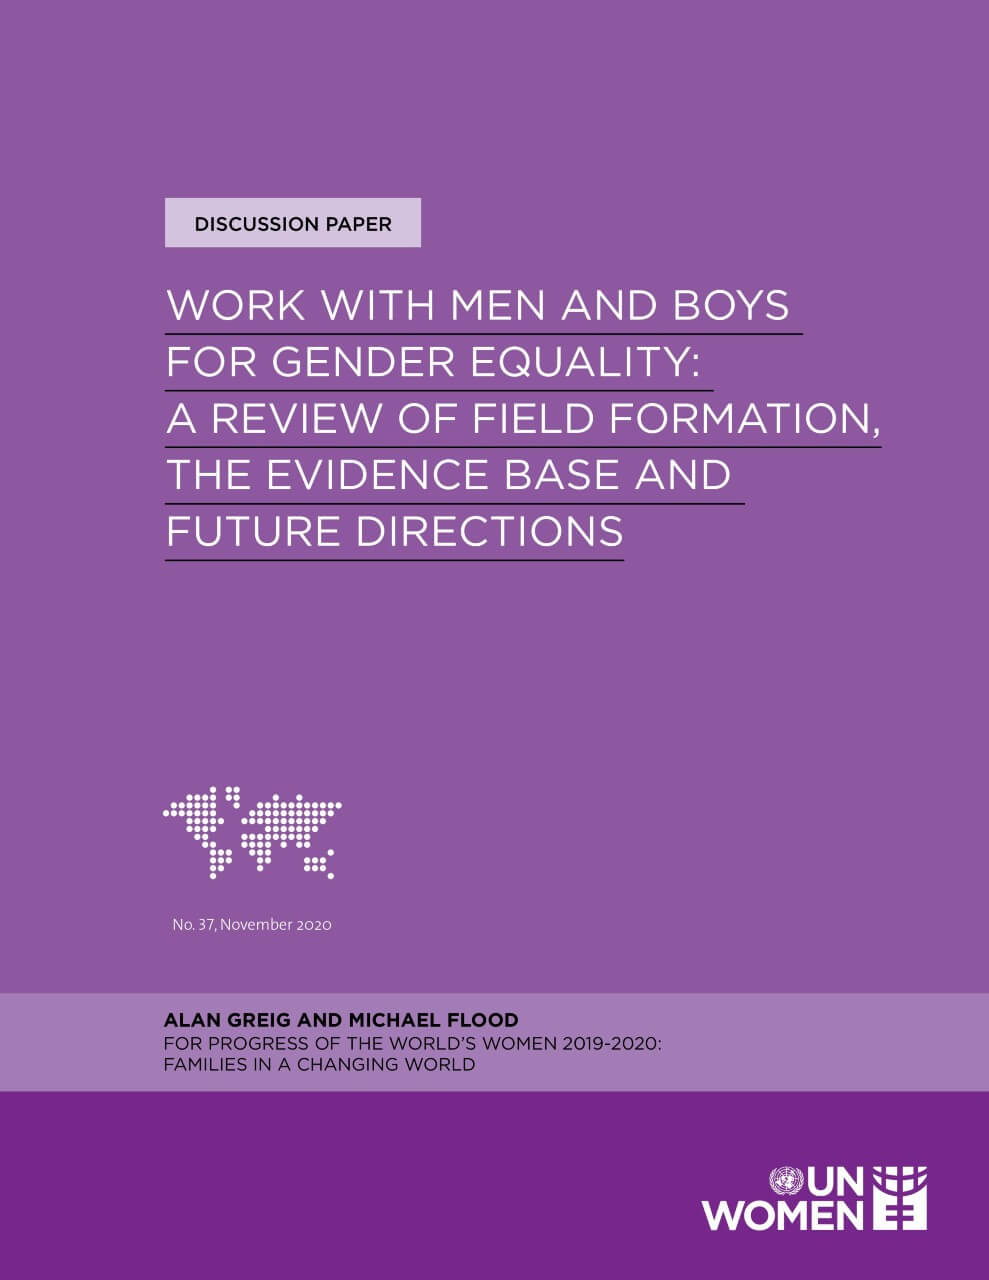 Work with men and boys for gender equality: A review of field formation, the evidence base and future directions